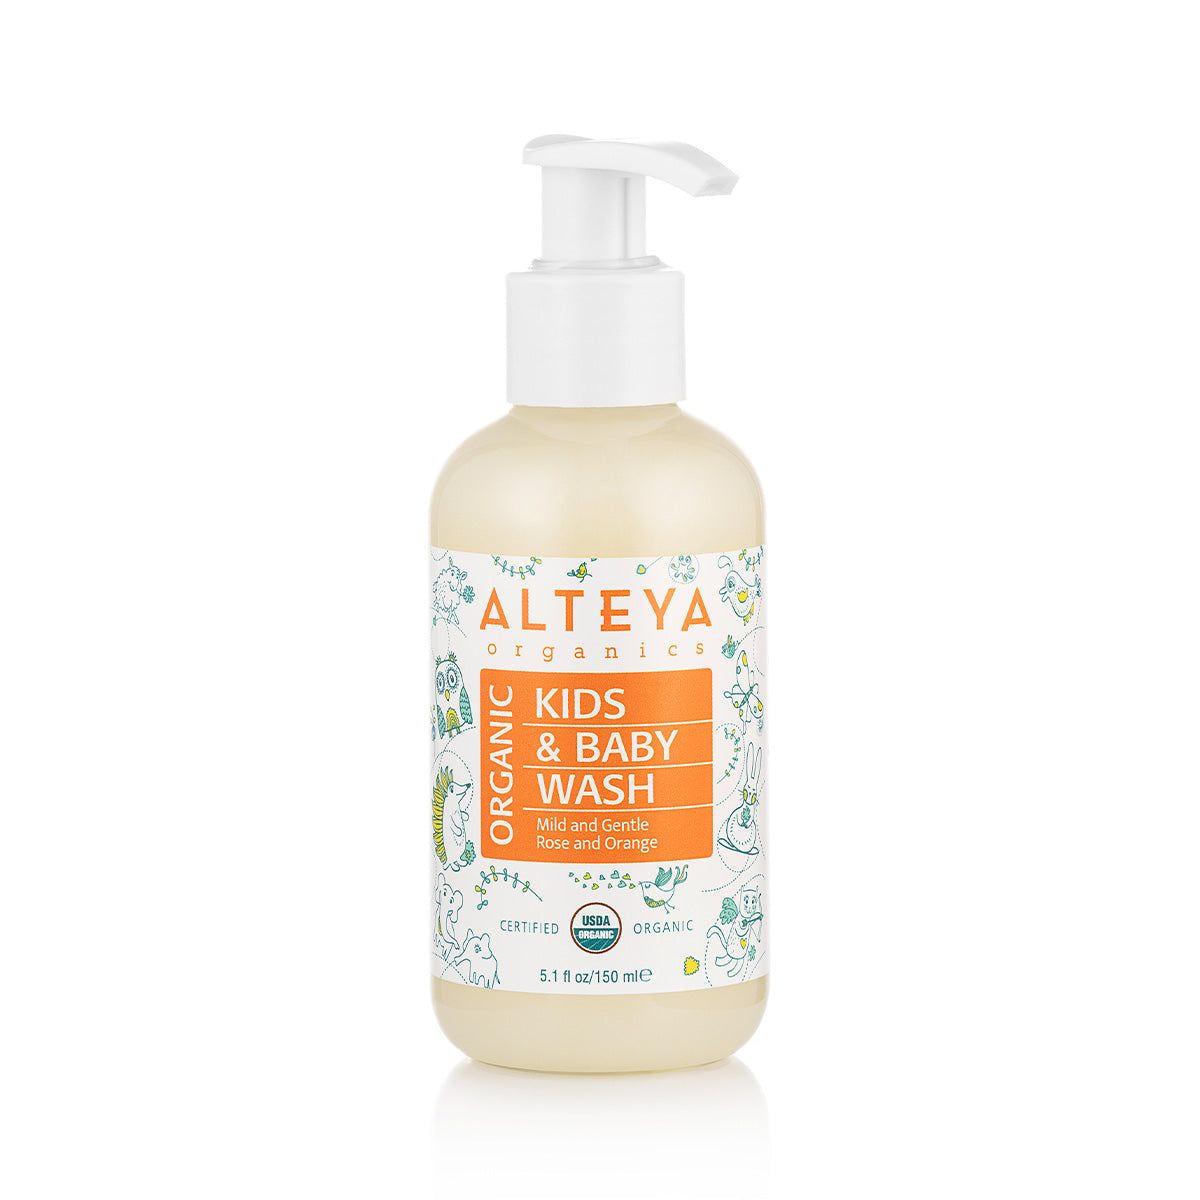 A bottle of Alteya Organics' Organic Baby Wash - Mild and Gentle 5.1 Fl Oz, specially formulated for sensitive skin.